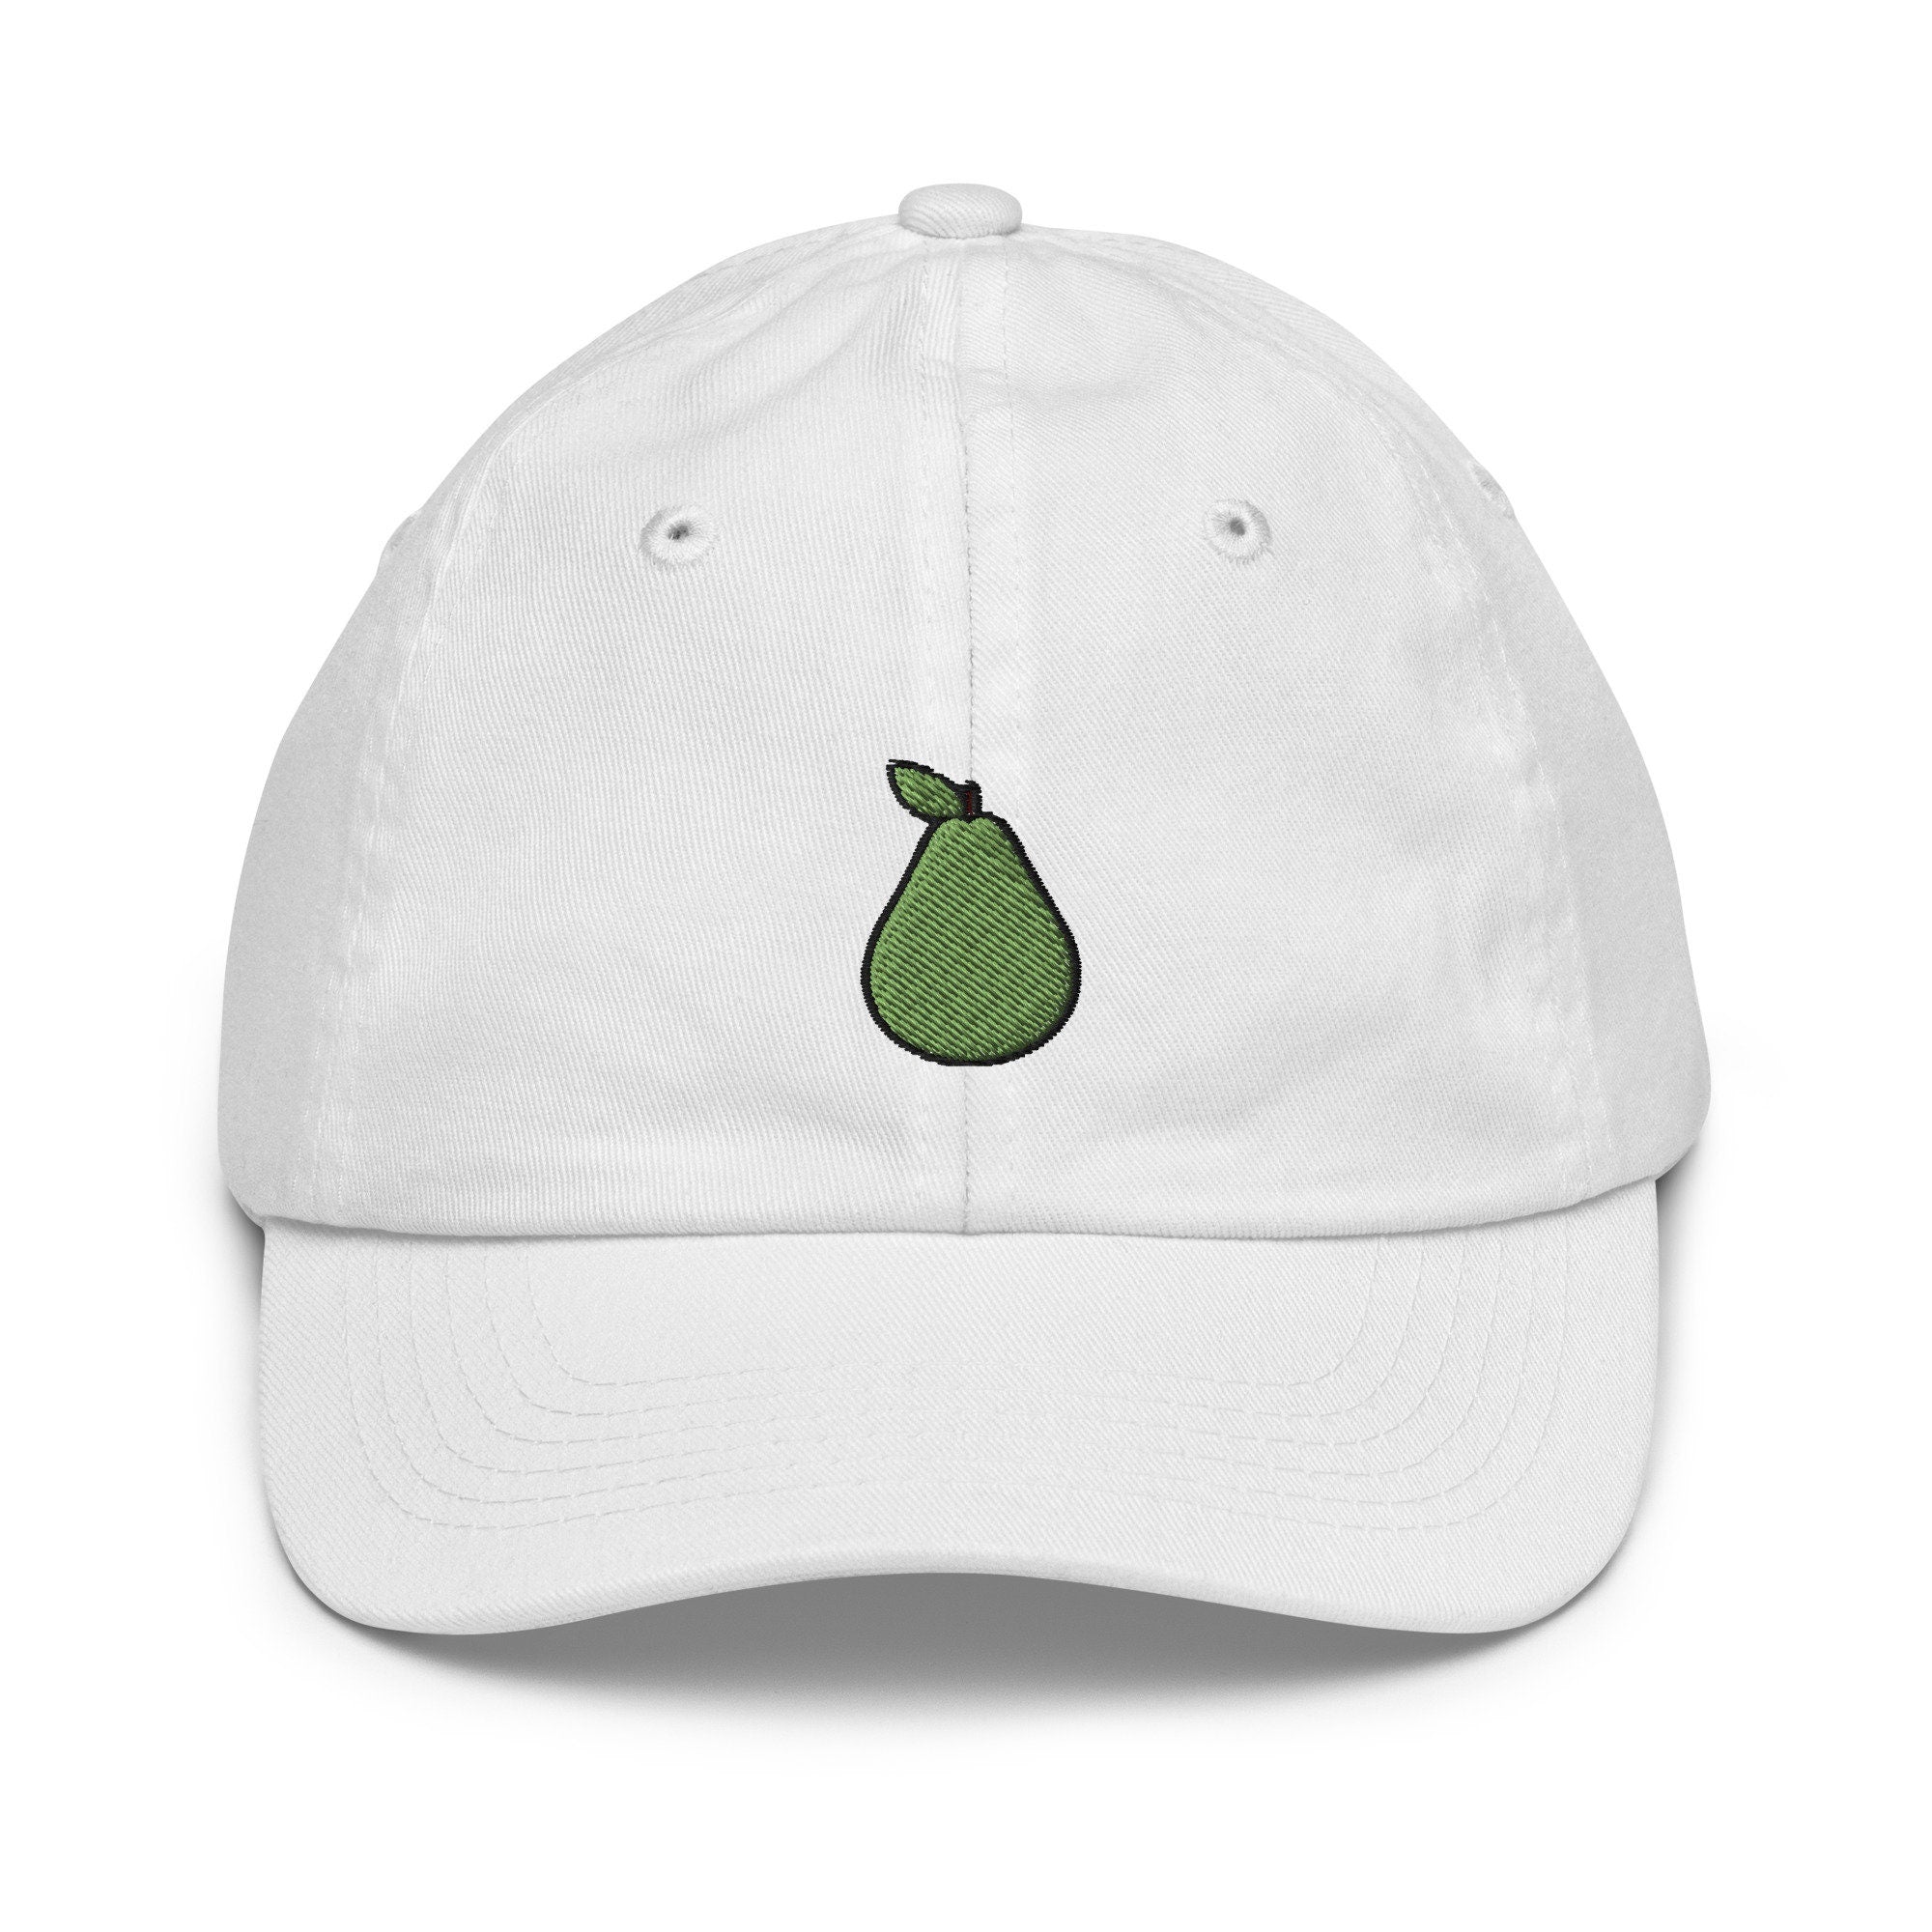 Kids Pear Youth Baseball Cap, Embroidered Kids Hat, Childrens Hat Gift - Multiple Colors